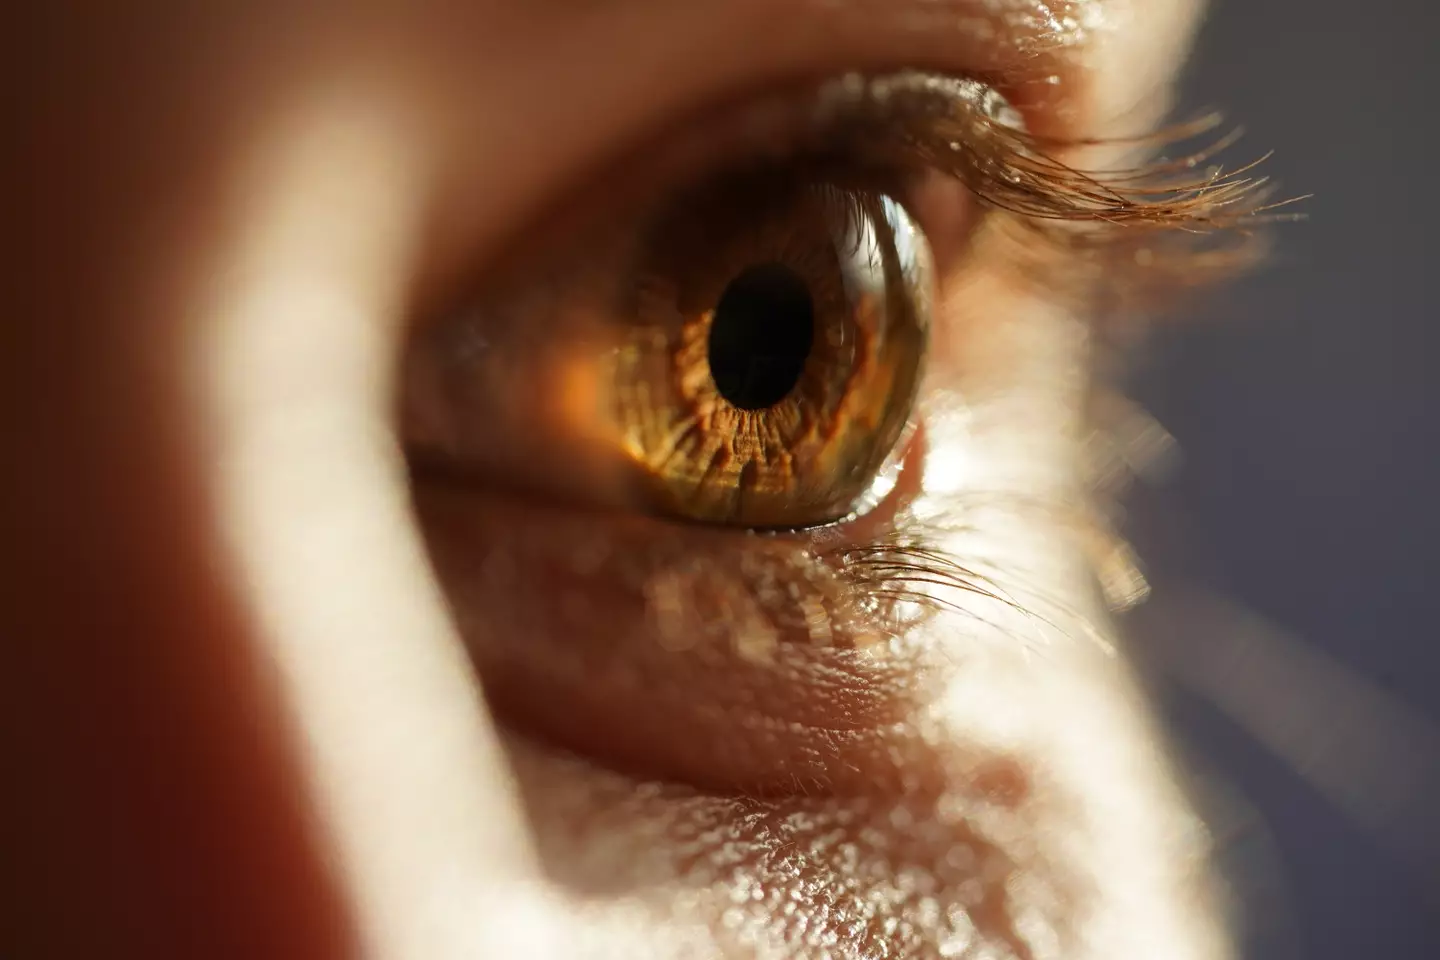 Scientists have miraculously found genes that can actually reverse vision loss in humans.